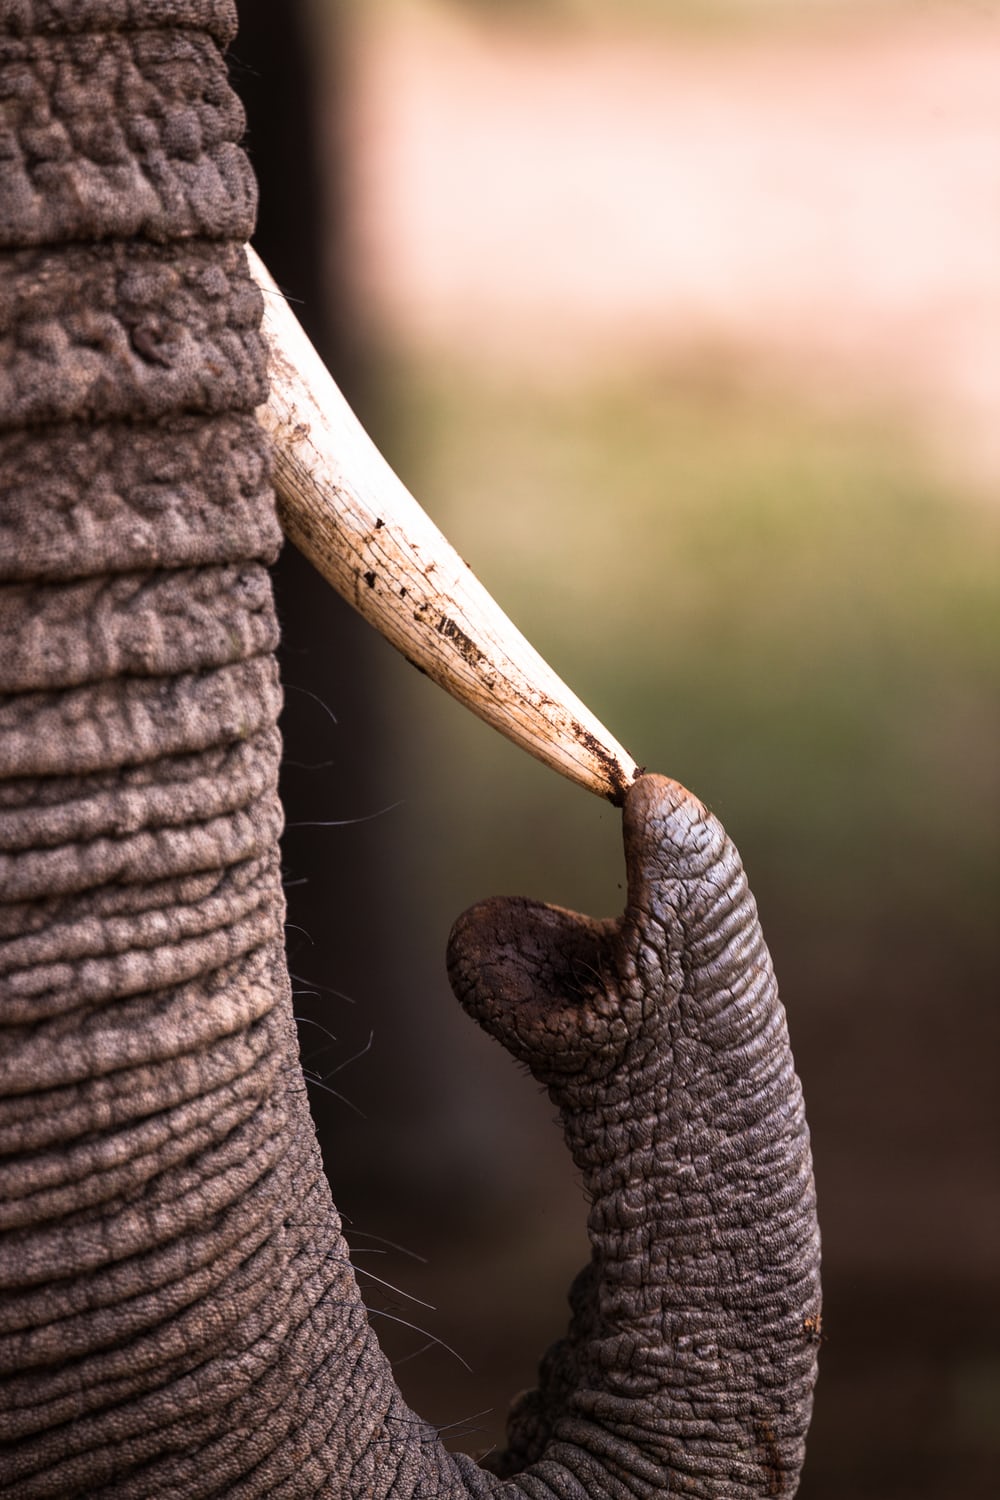 Demand for ivory from Asian countries such as China and Vietnam has led to a surge in poaching across Africa. An estimated 100 African elephants are killed each day by poachers, leaving only 400,000 remaining, according to estimates by environmentalists.